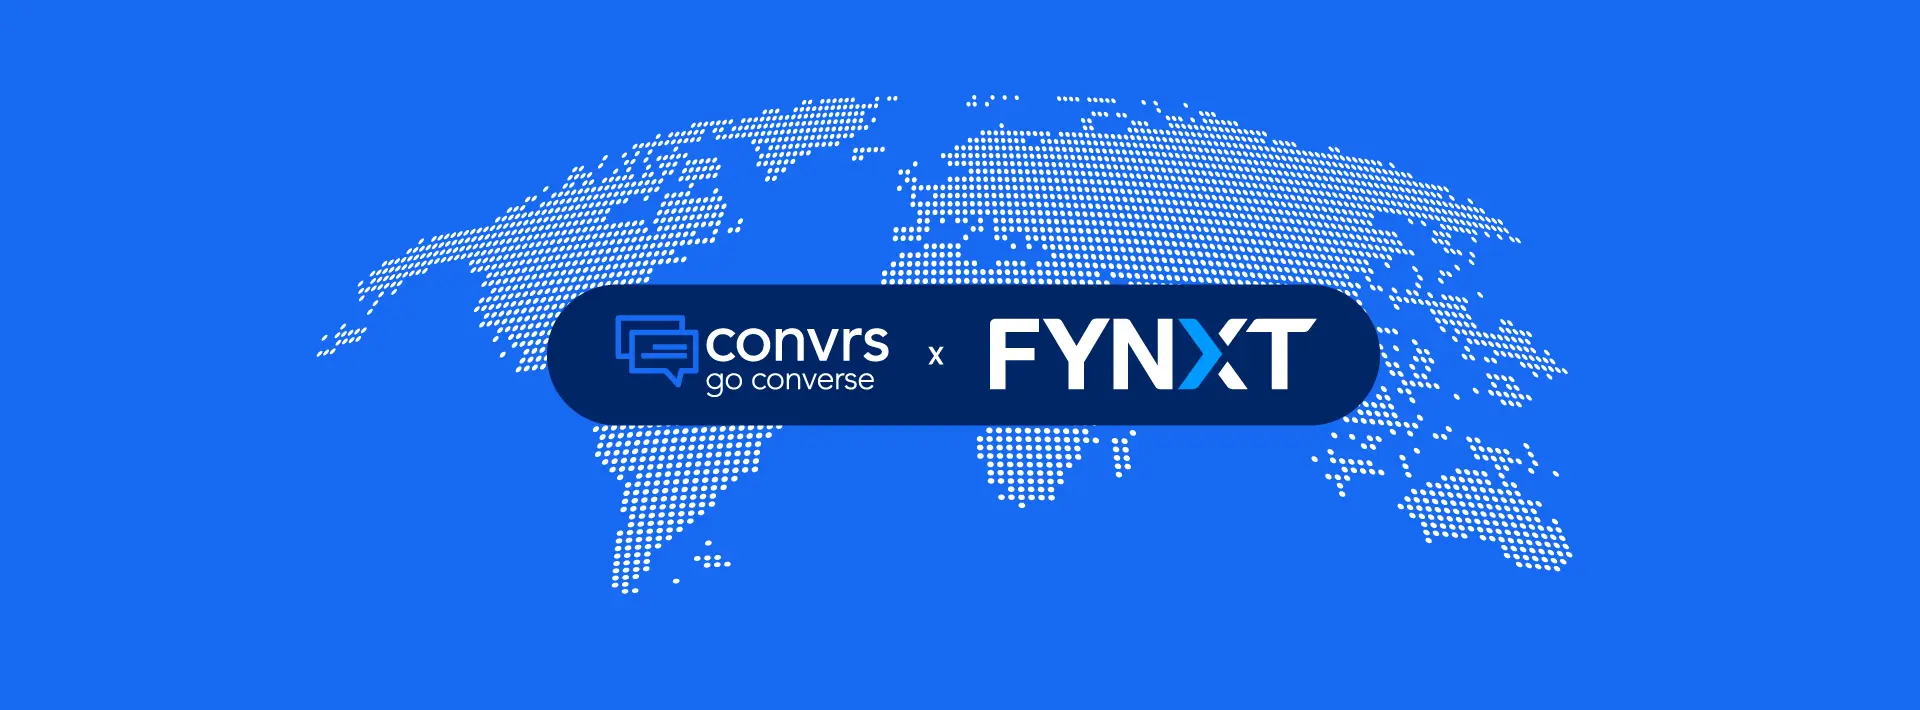 Convrs and FYNXT partnership enhance customer experiences in the Financial Services industry.